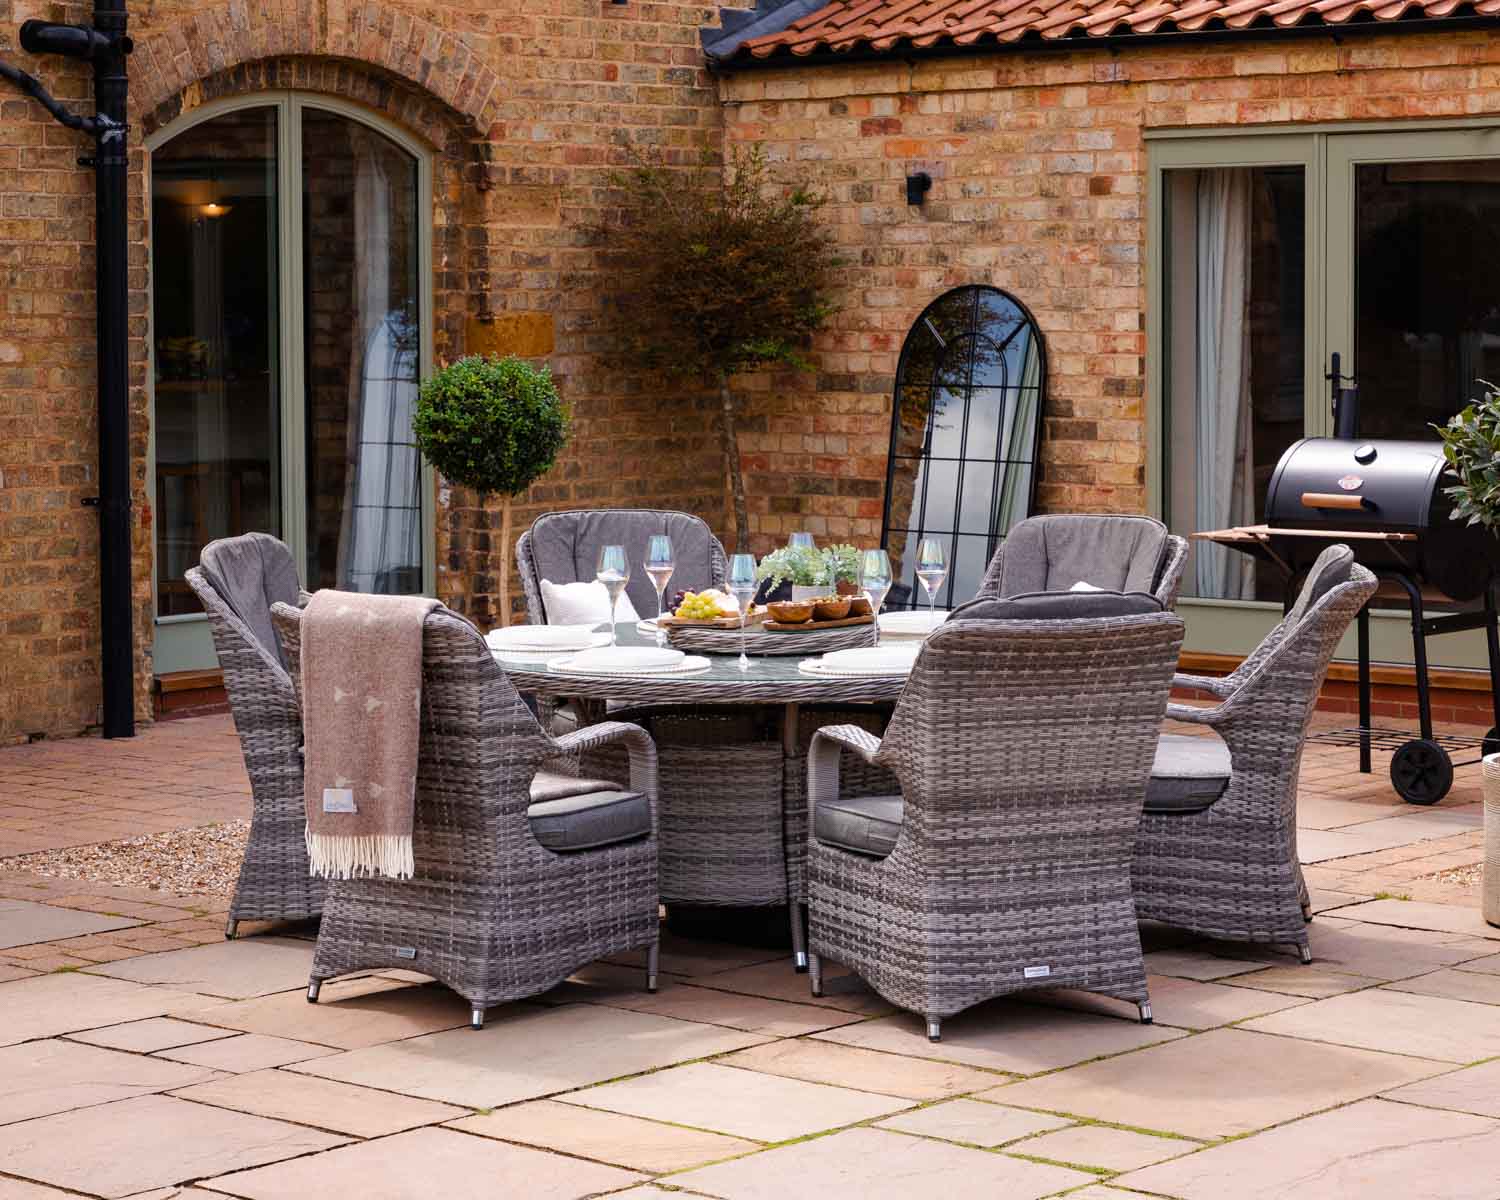 Marseille 6 Rattan Garden Dining Chairs Large Round Table With Lazy Susan In Grey